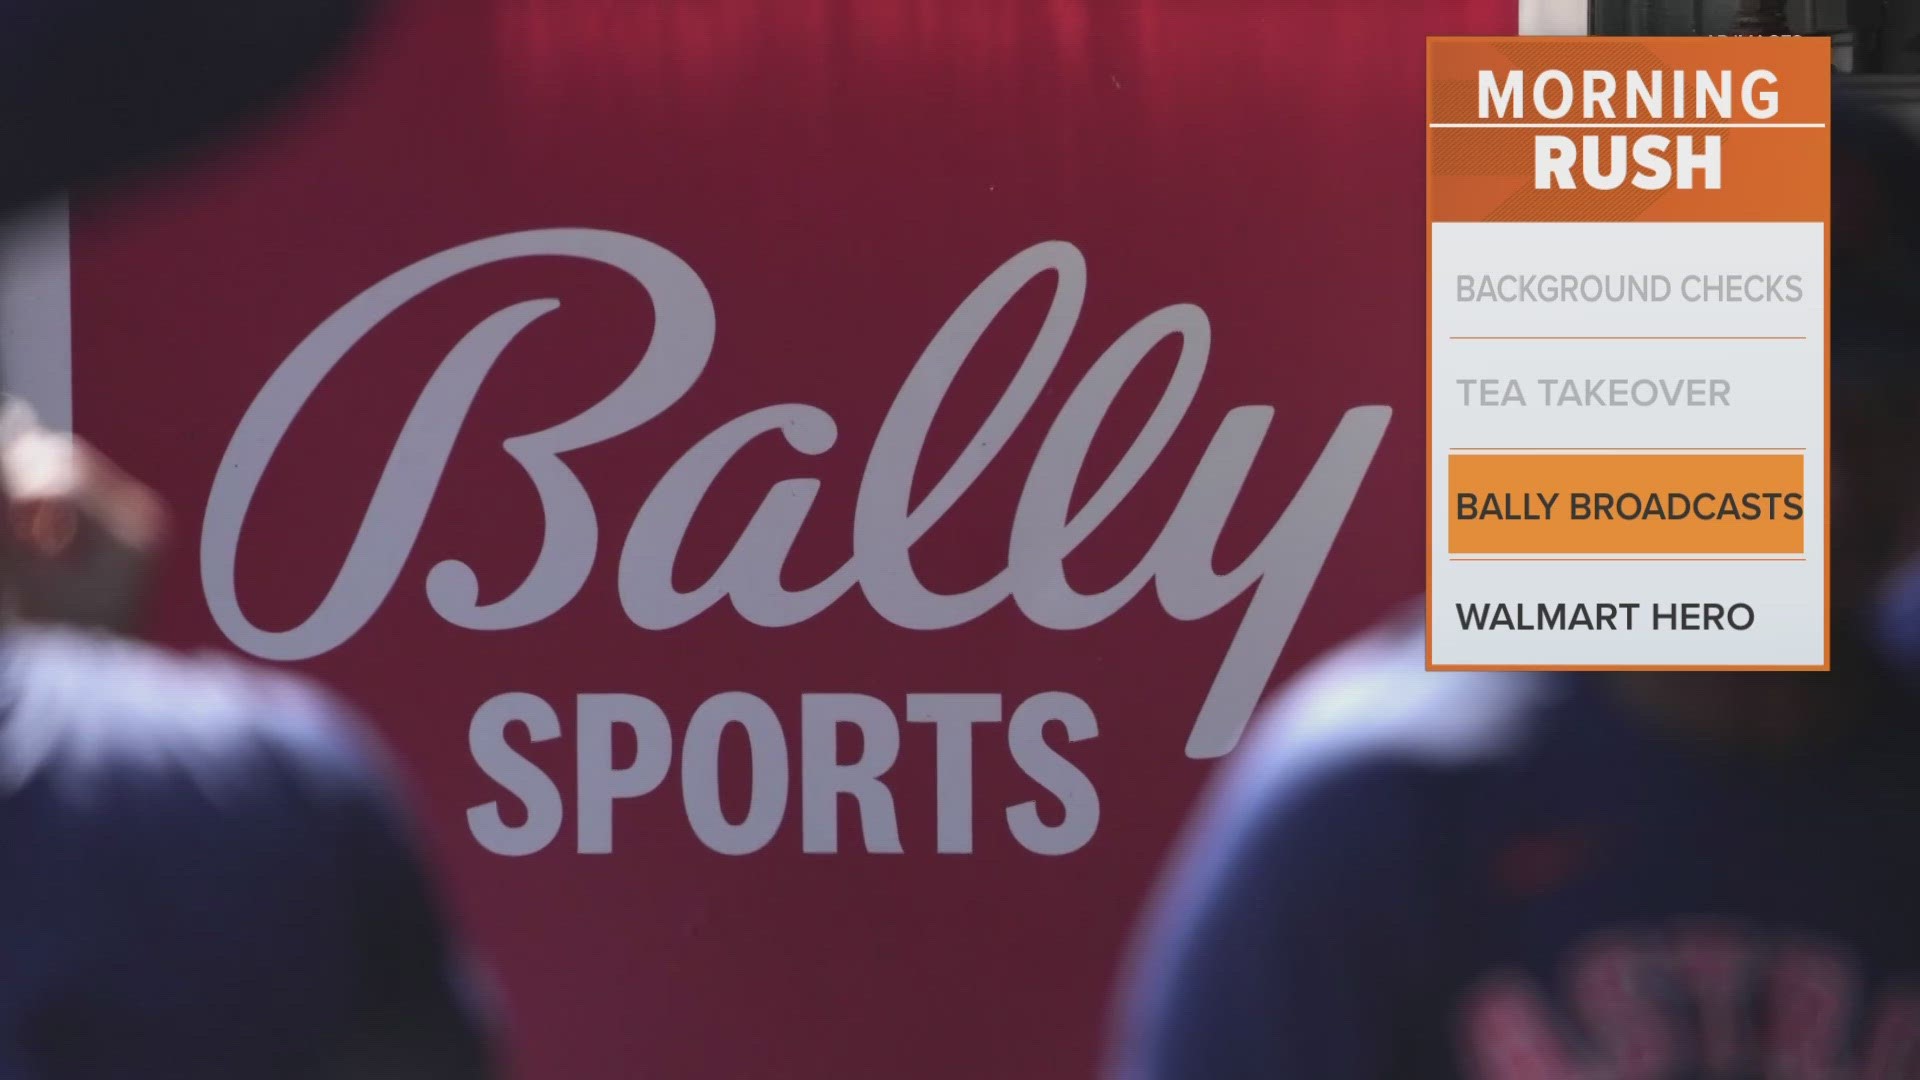 The company said it expects to run the Bally Sports networks in "ordinary course" during the bankruptcy process.